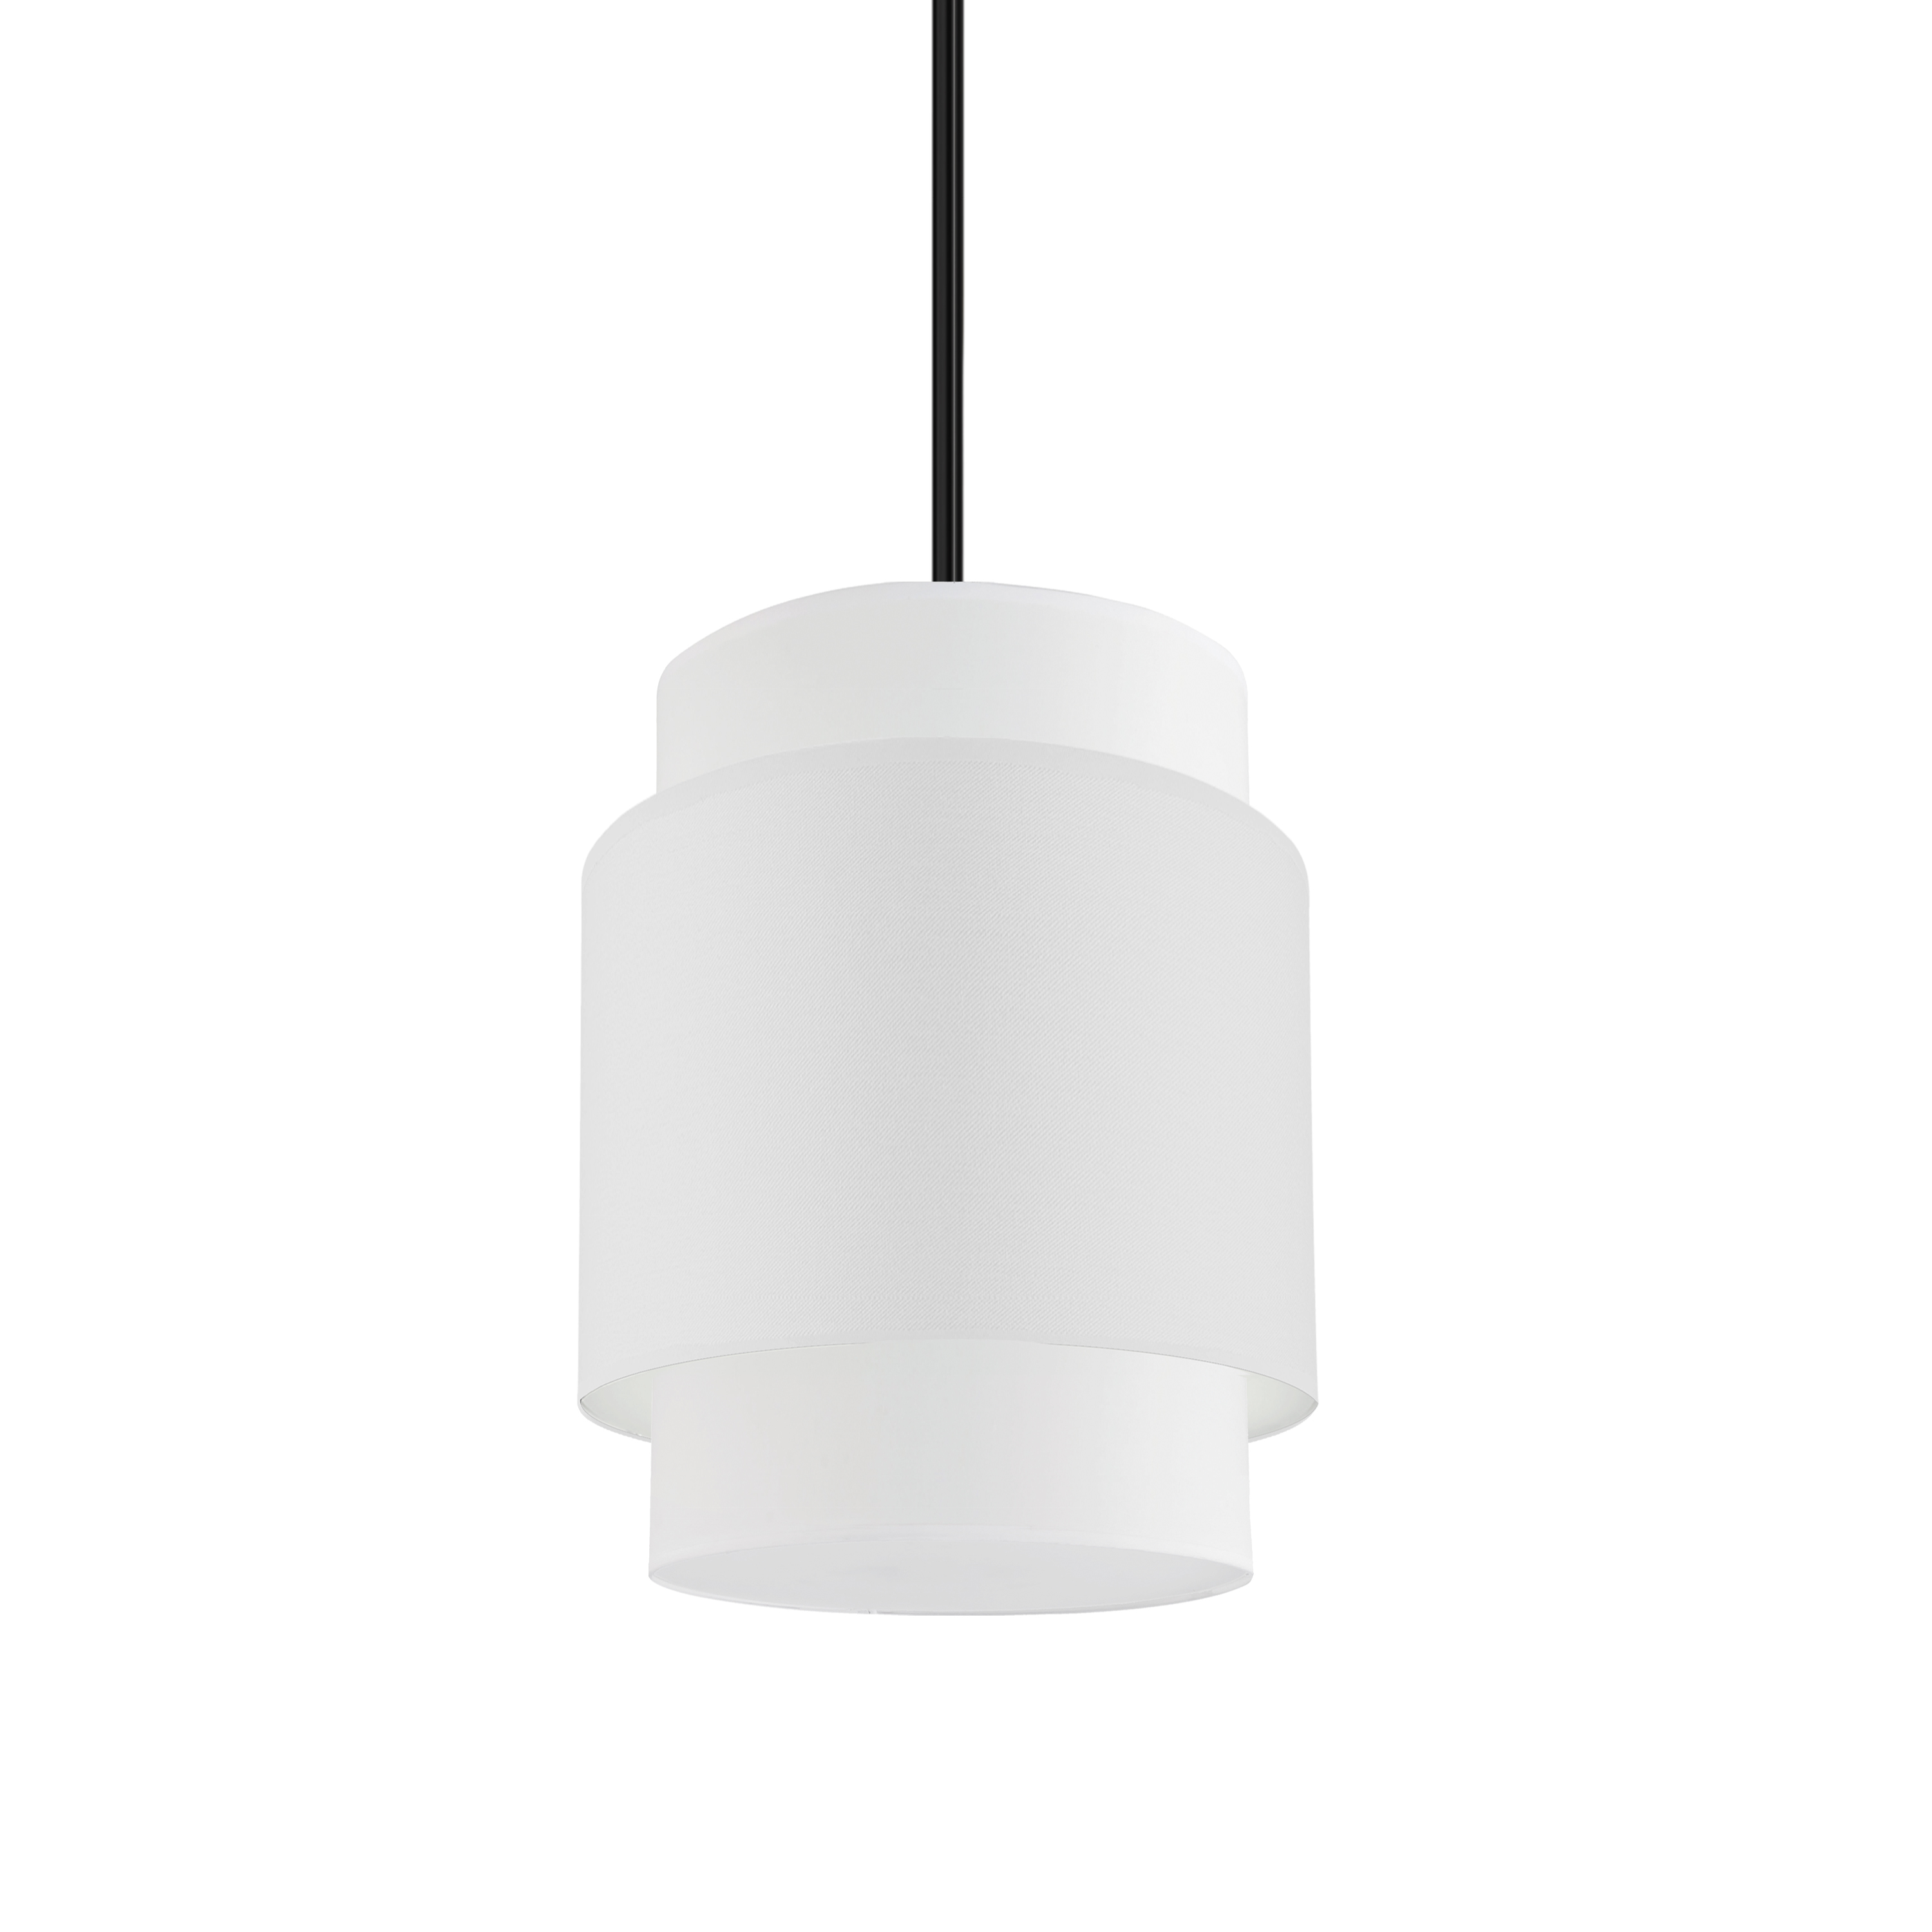 Add a pop of artisan-style allure to your home with the Priya family of lighting. With its multi-dimensional construction, it creates curves and textural interest in contemporary or minimalist design schemes. From a simple drop, the design is constructed with overlapping fabric drum shades. Color options include subtle monochromatic as well as contrasting configurations for added eye appeal. The effect is simple, yet stylish, and suitable for living or dining rooms, kitchens and hallways.